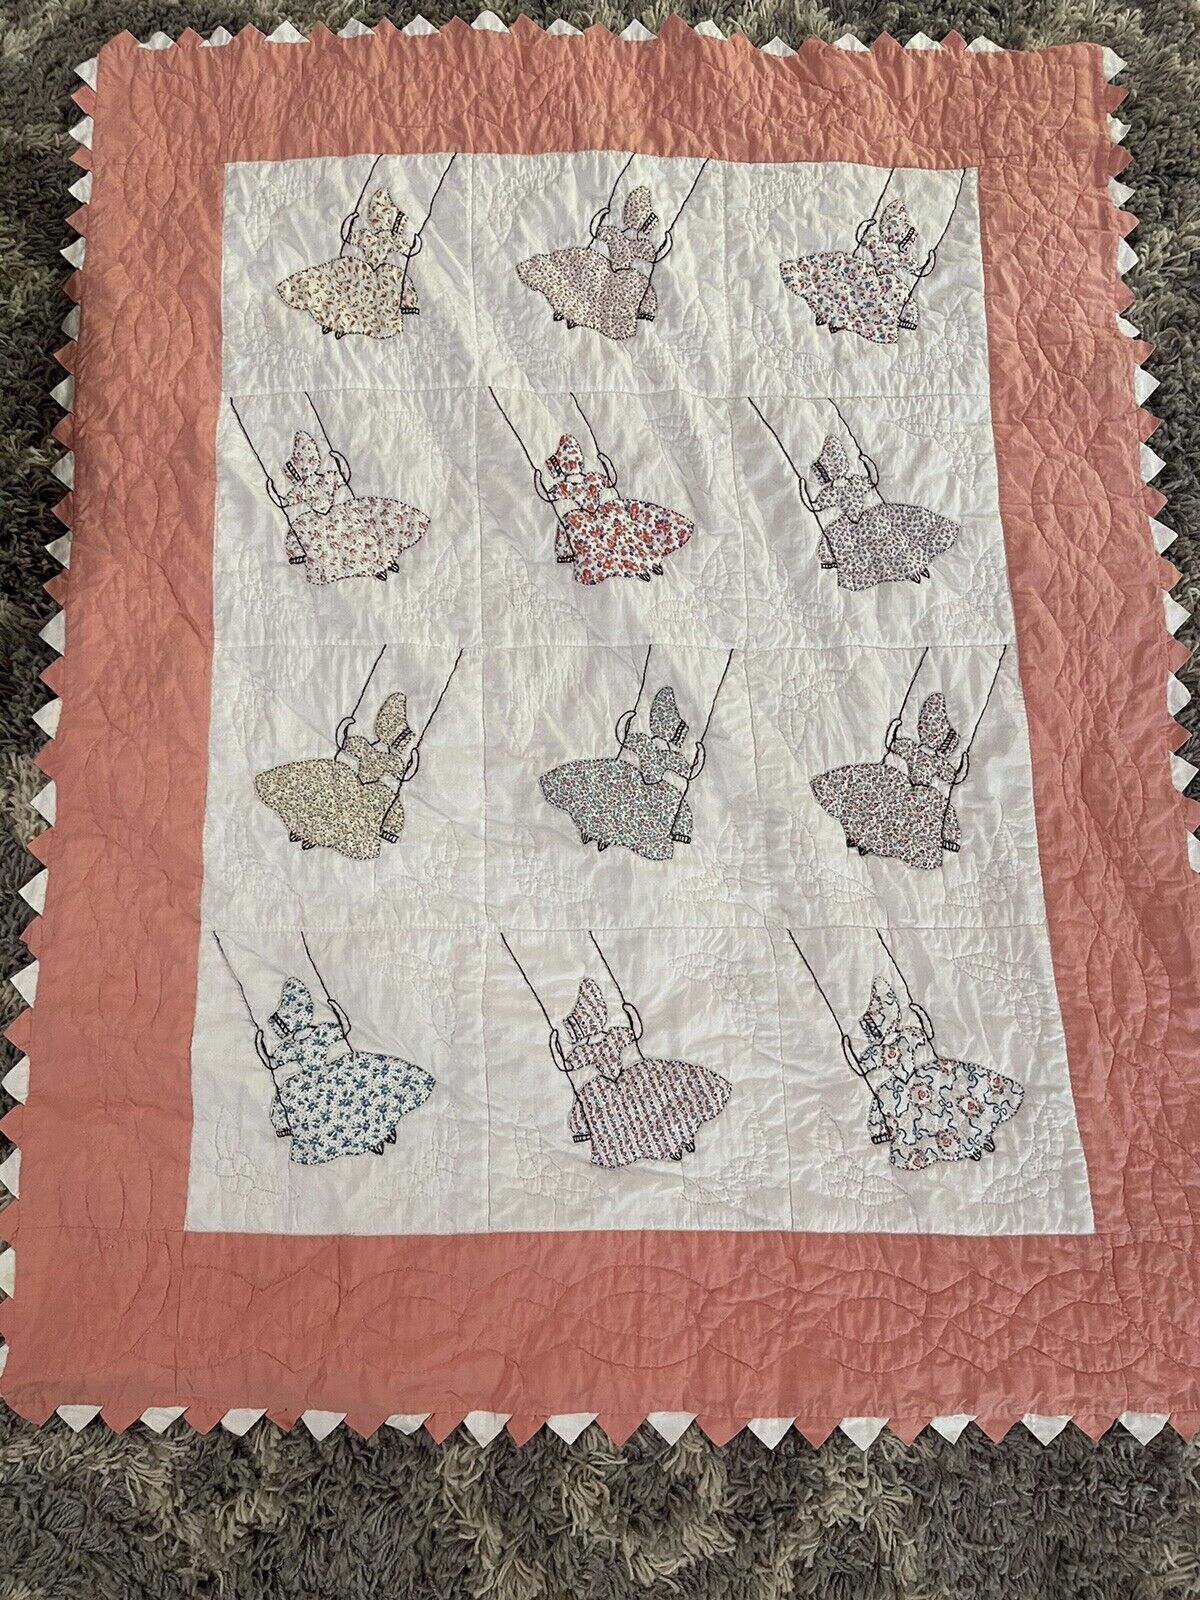 Small Sunbonnet Sue Swing - Baby Quilt Hand Embroidered/ Applique and Quilted